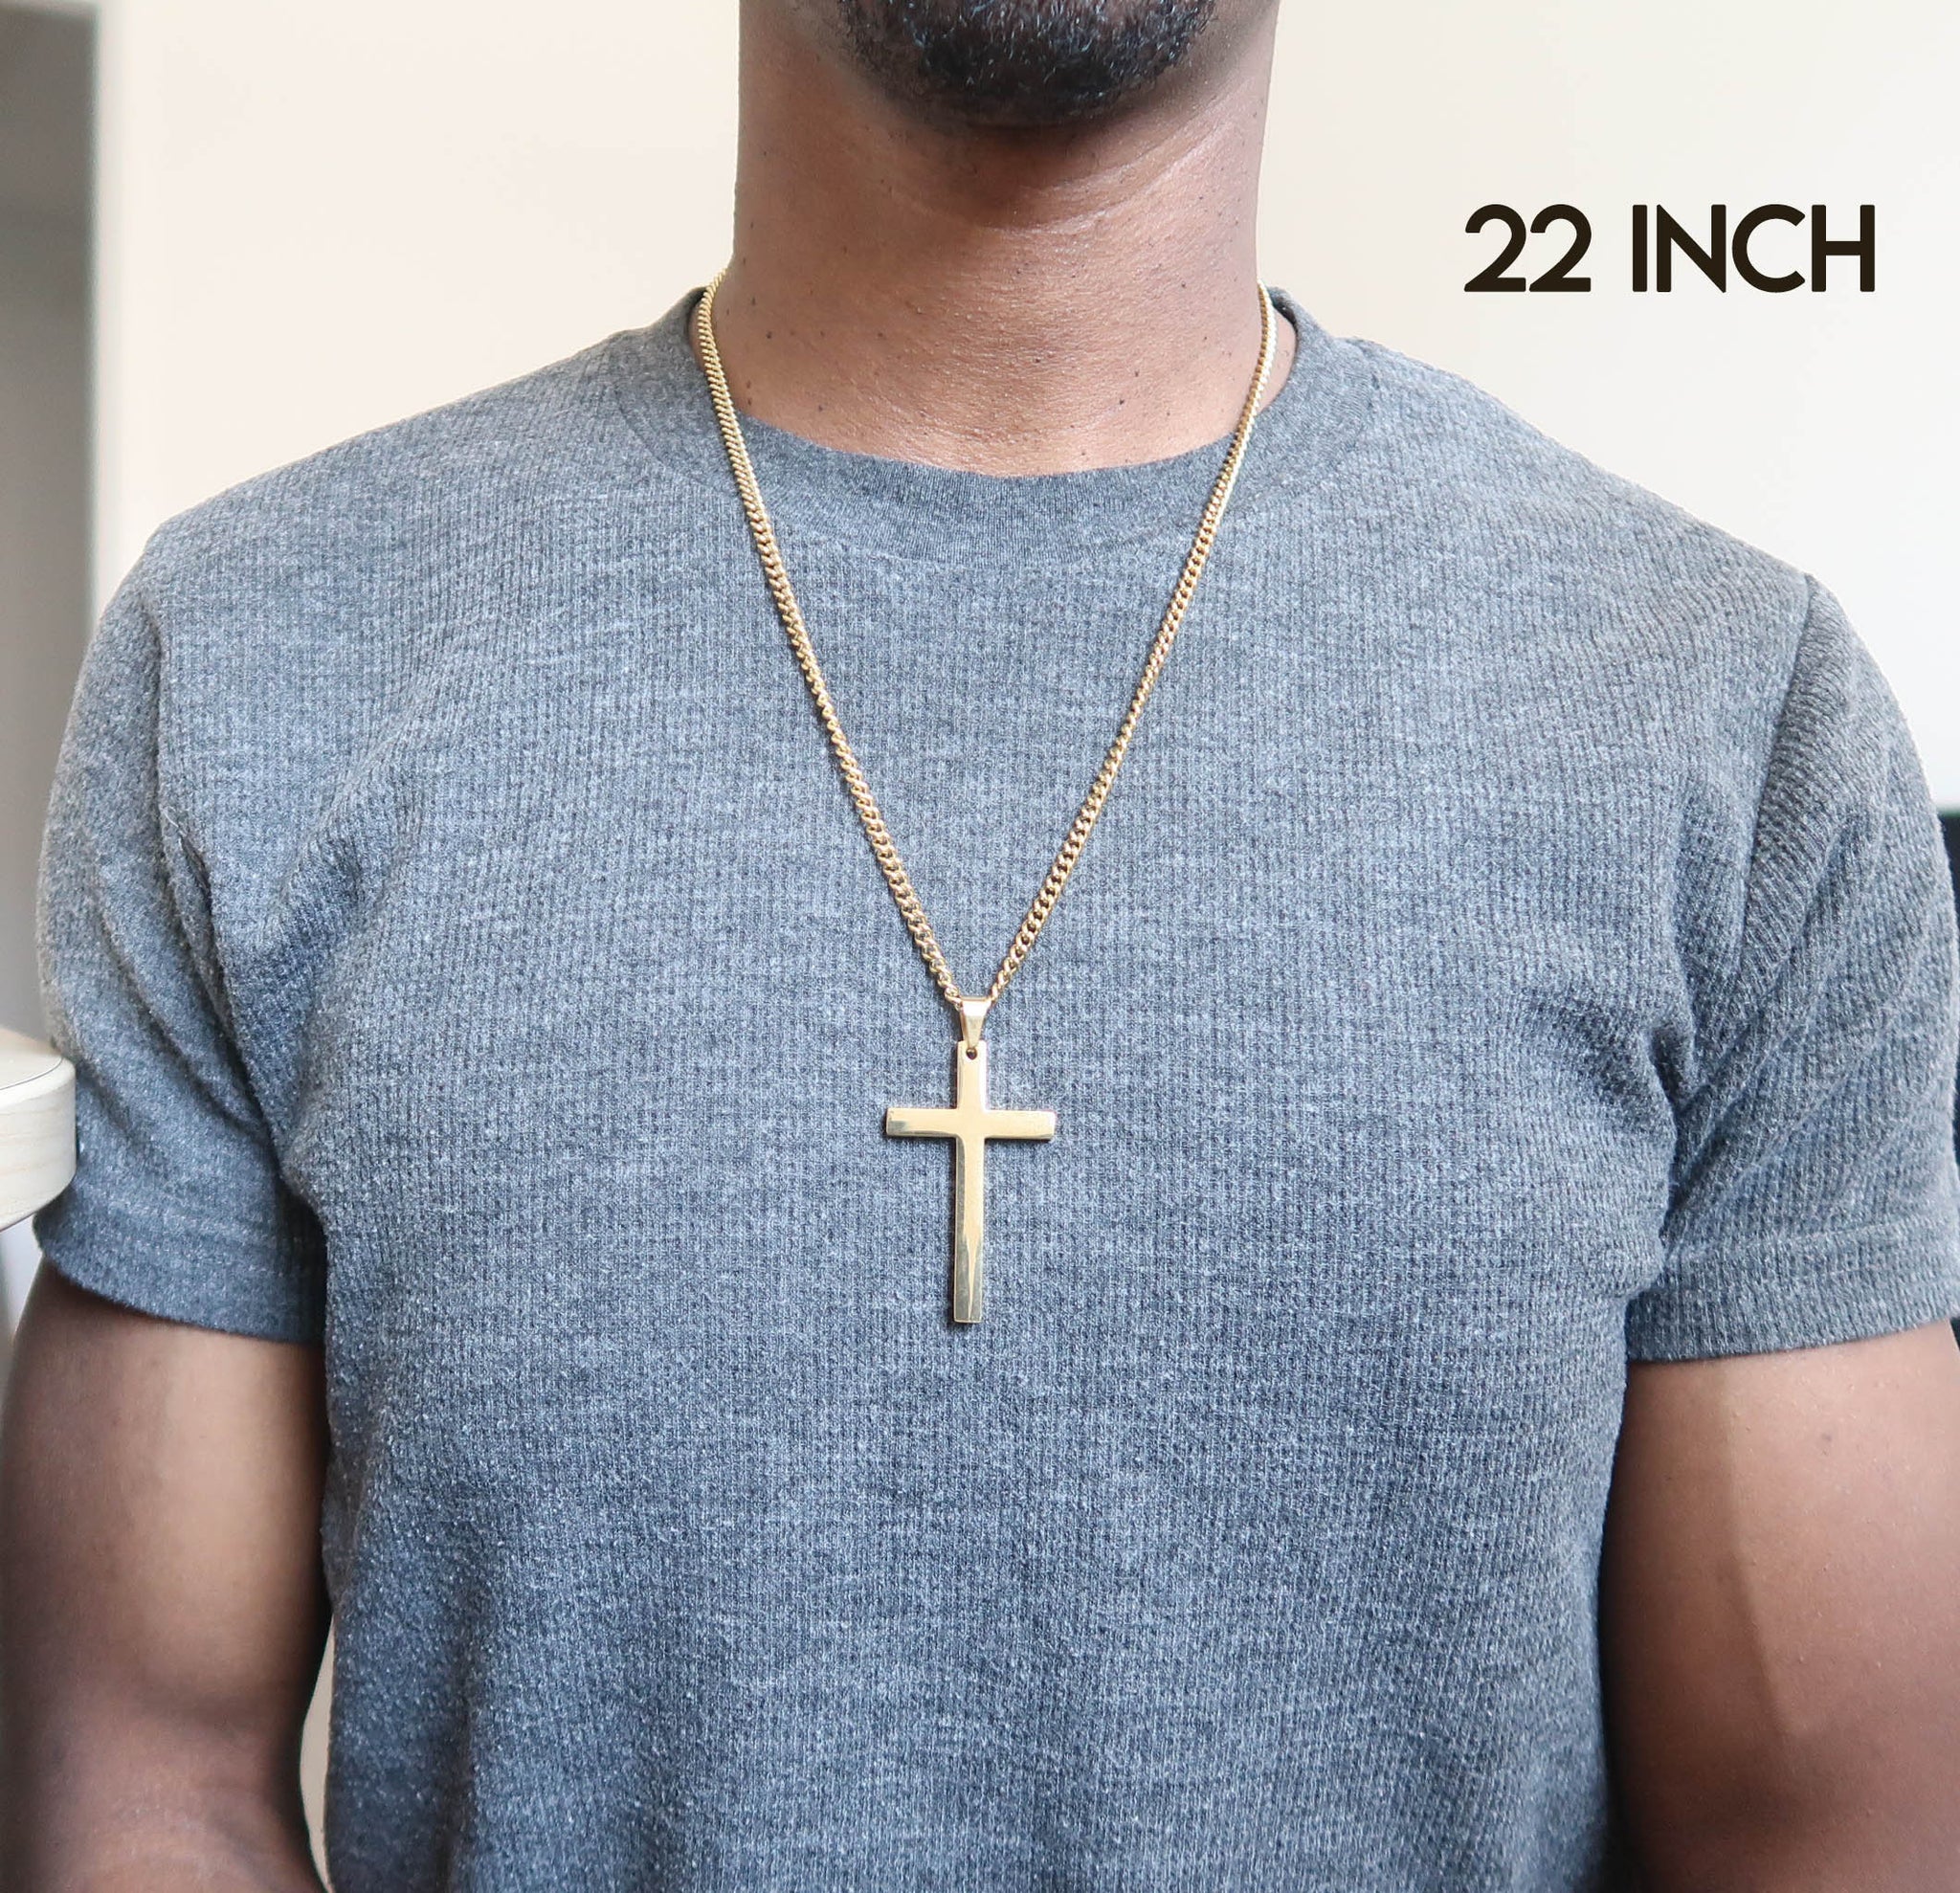 24 inch Mens 14k Yellow Gold Cross Necklace | Shane Co.